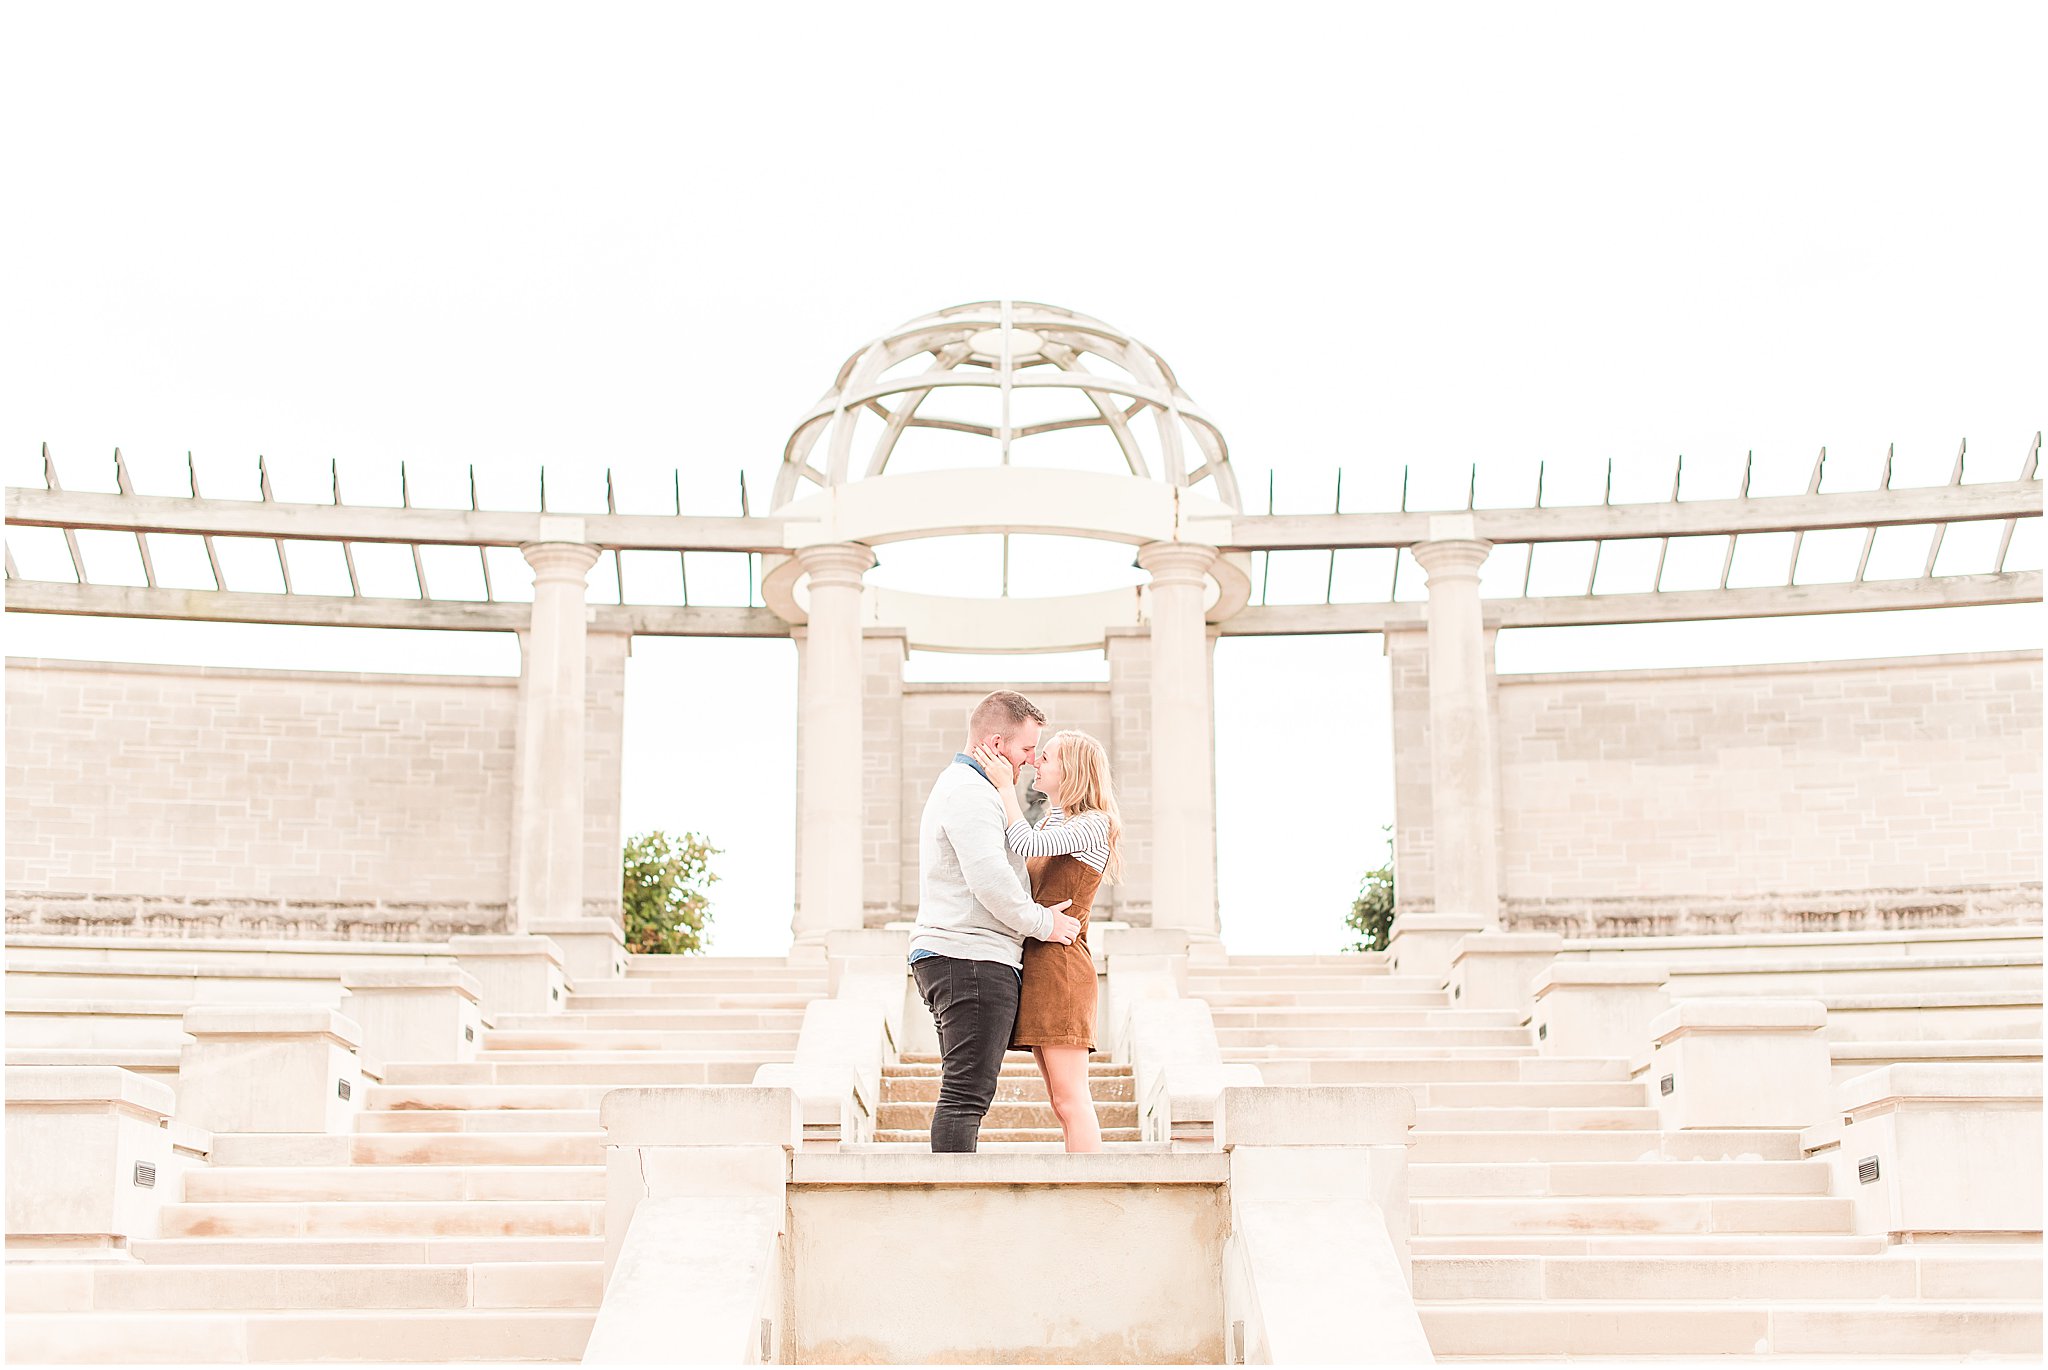 Couple smiling nose to nose in ampitheater at Coxhall Gardens engagement session